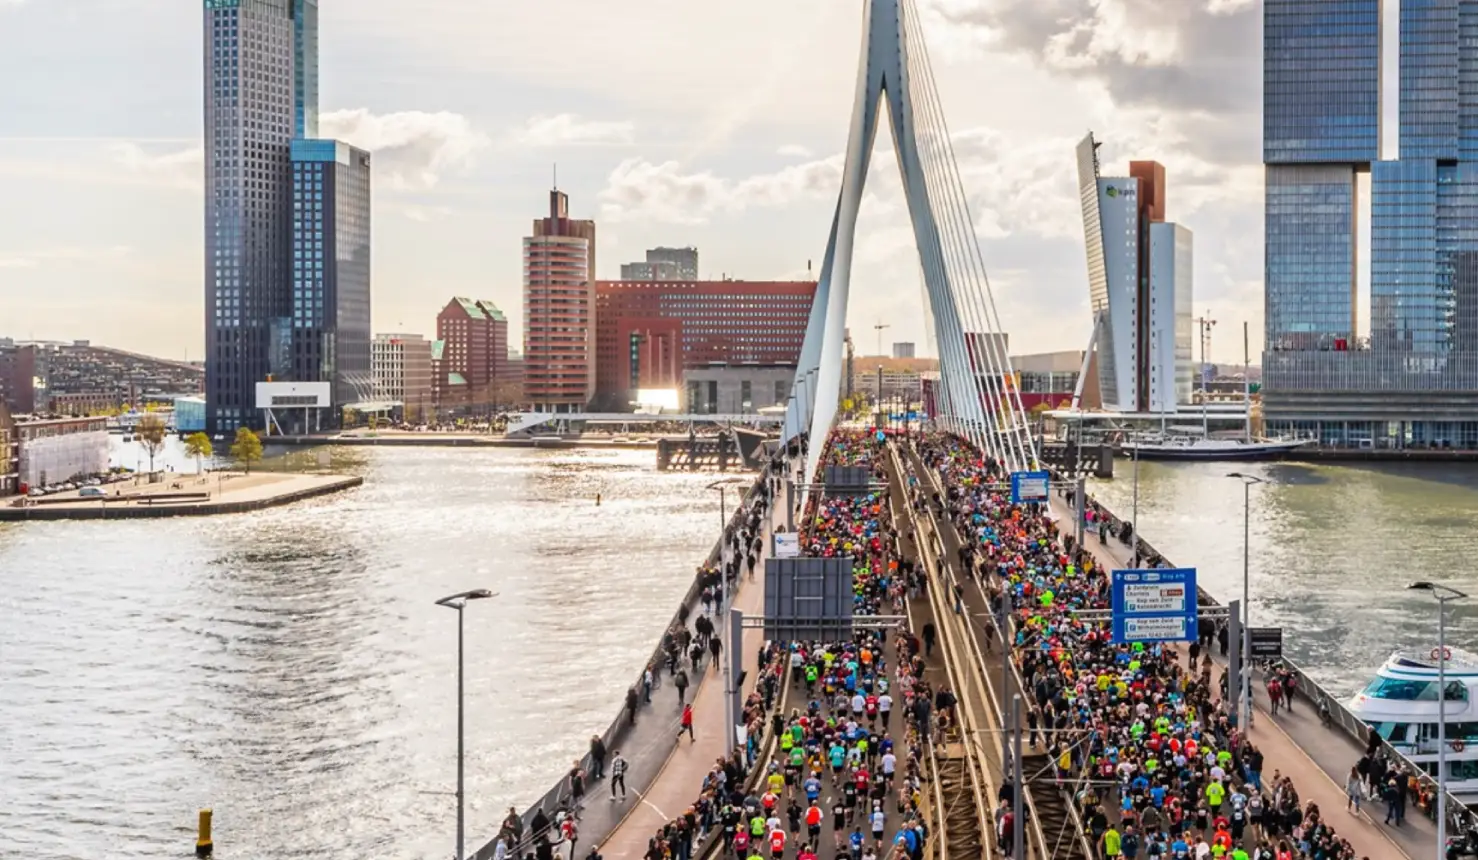 How to watch the 2023 Rotterdam Marathon on April 16?